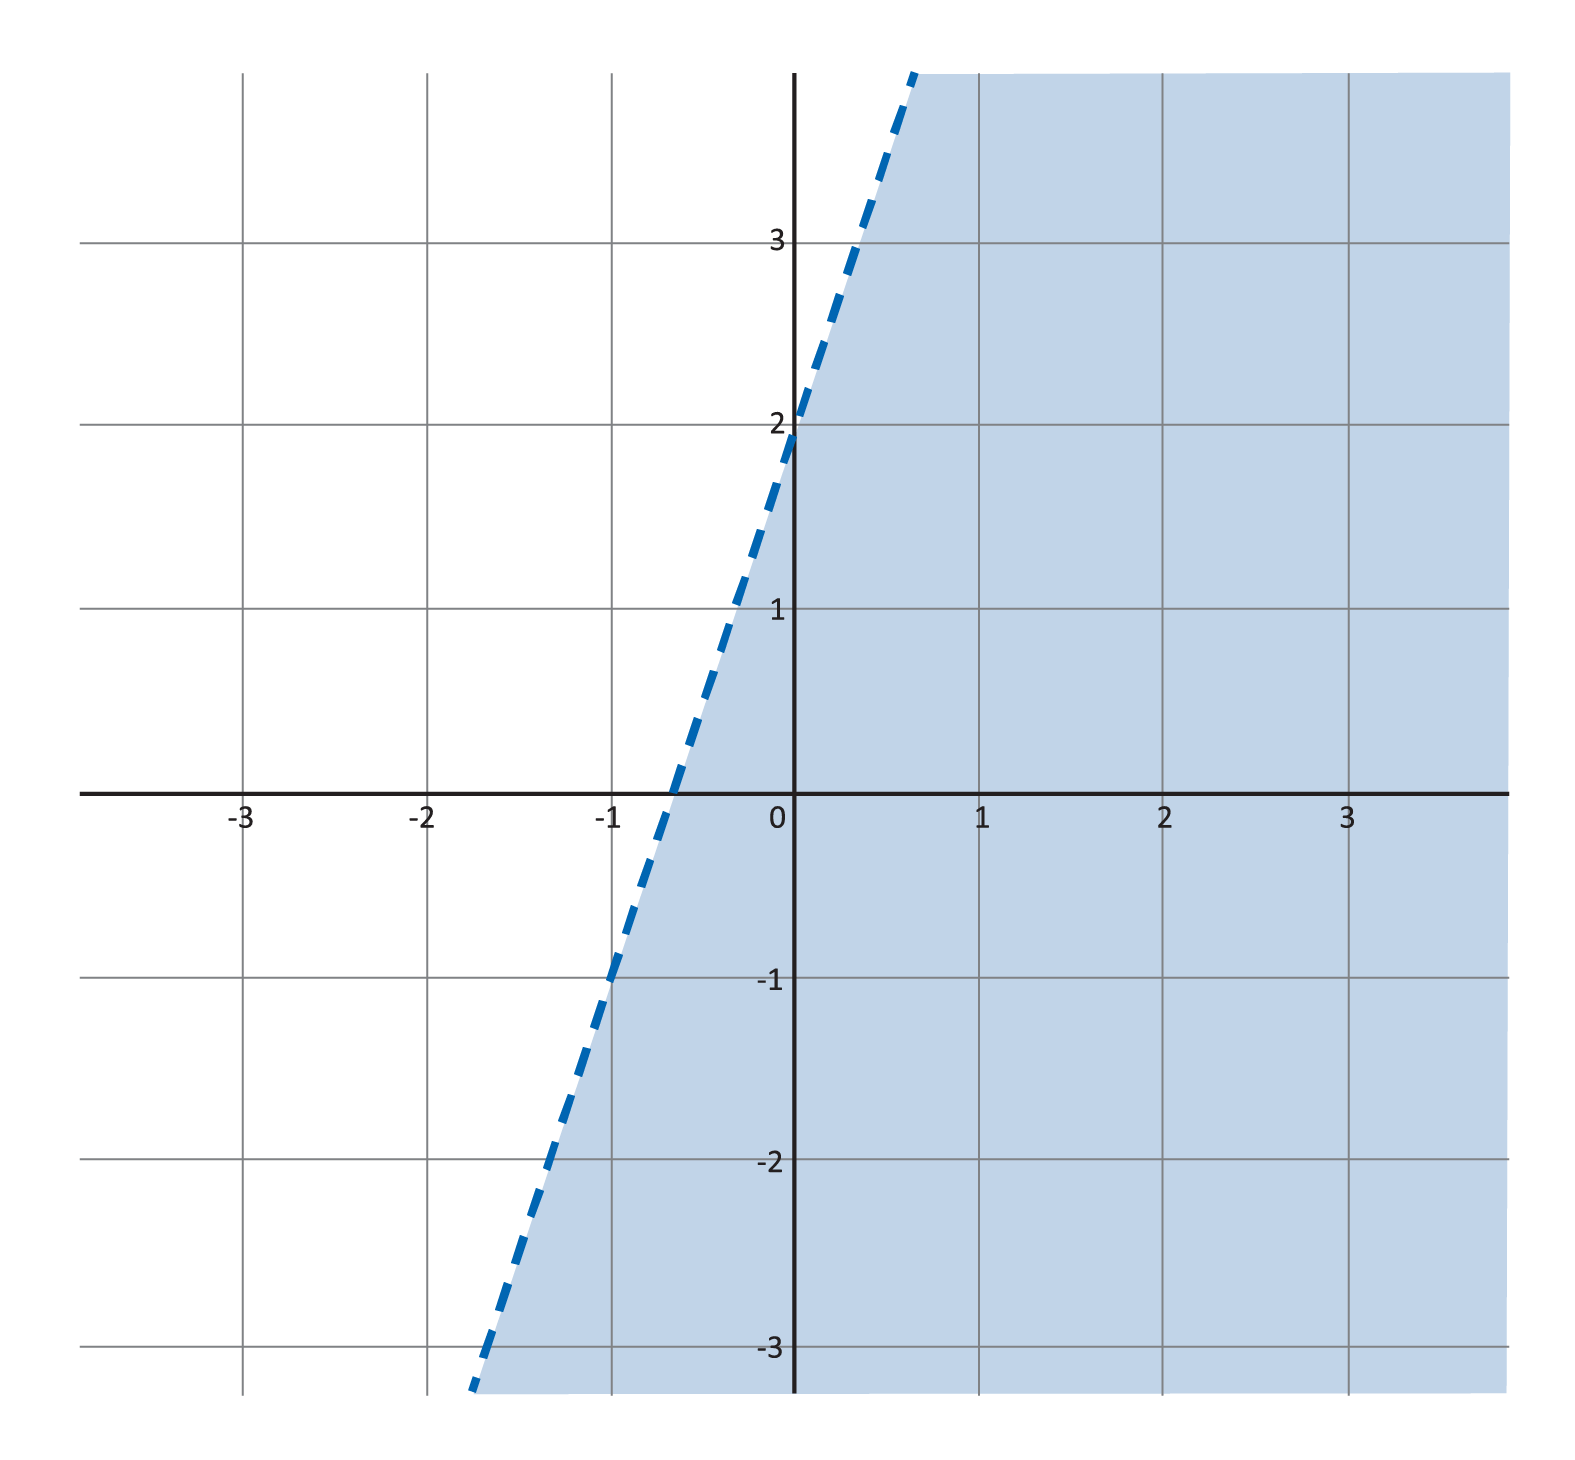 dashed line passing through the points (negative 1, negative 1) and (0, 2), below line is shaded blue